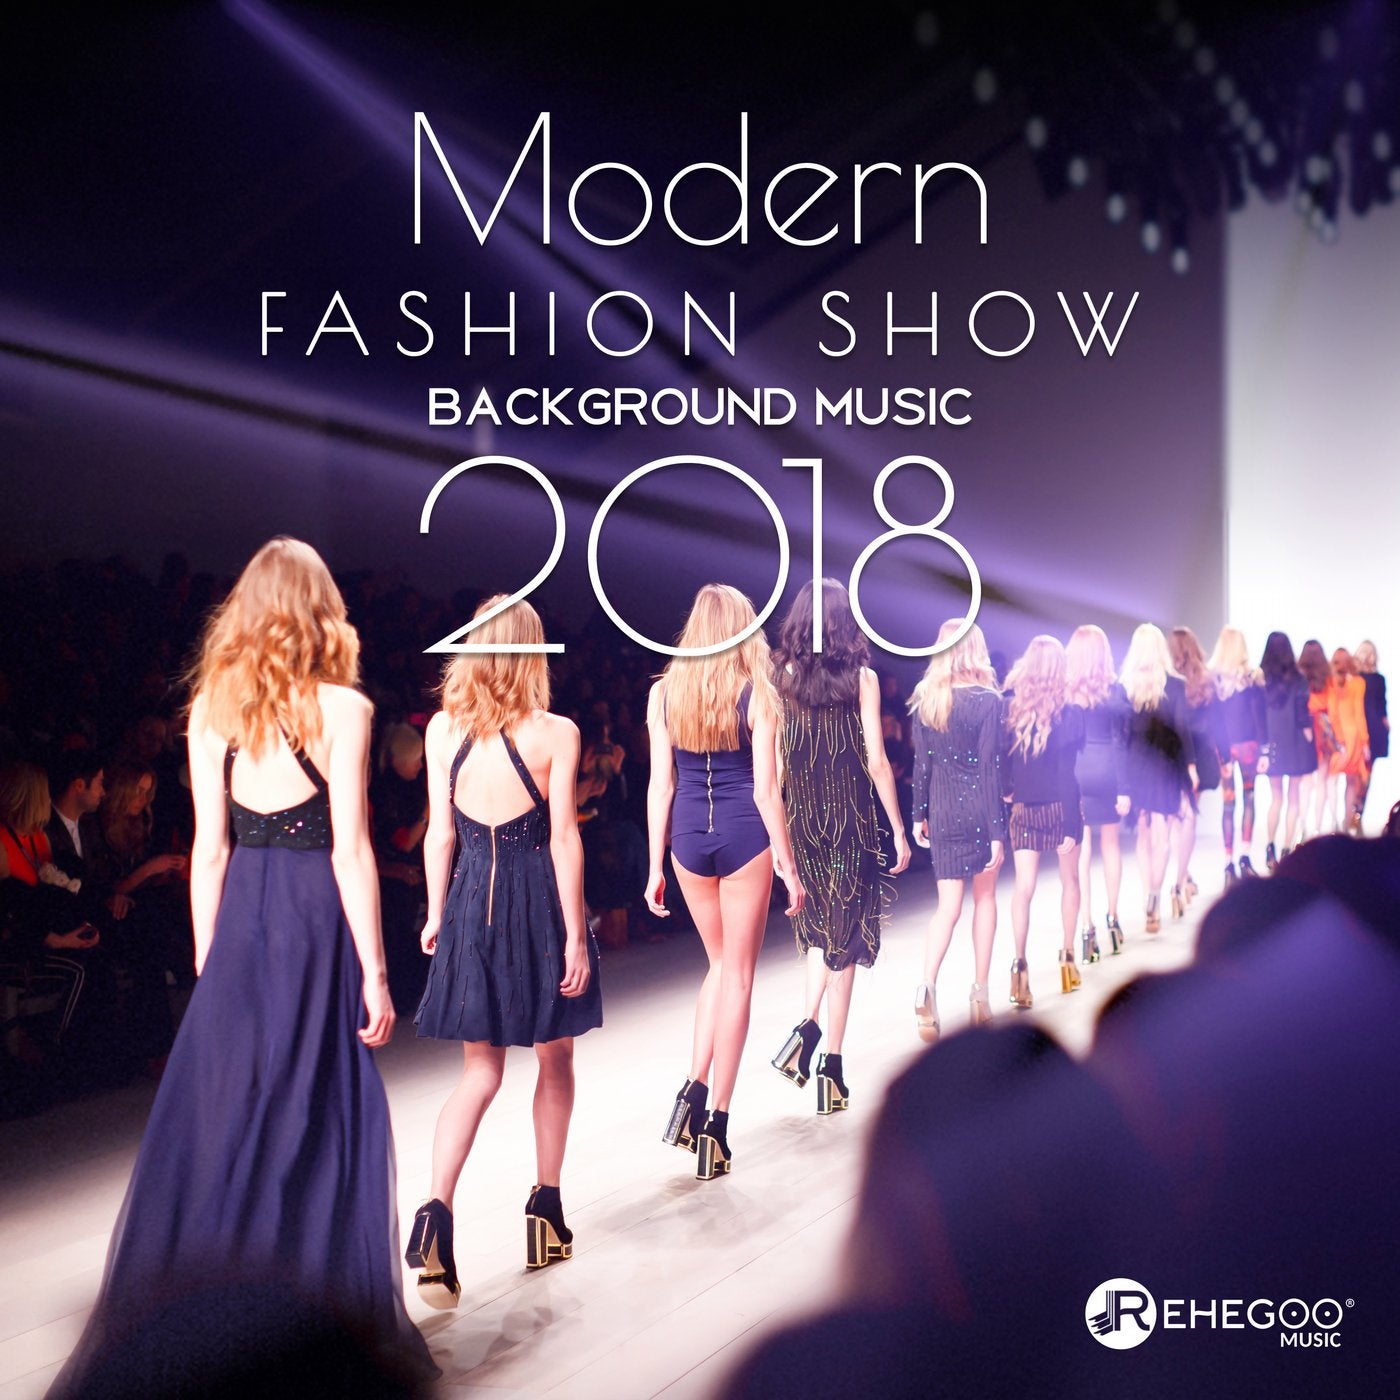 Modern Fashion Show Background Music 2018 (Electronic Songs for Runway,  Stylish Fashion Lounge) from Rehegoo Music Group on Beatport